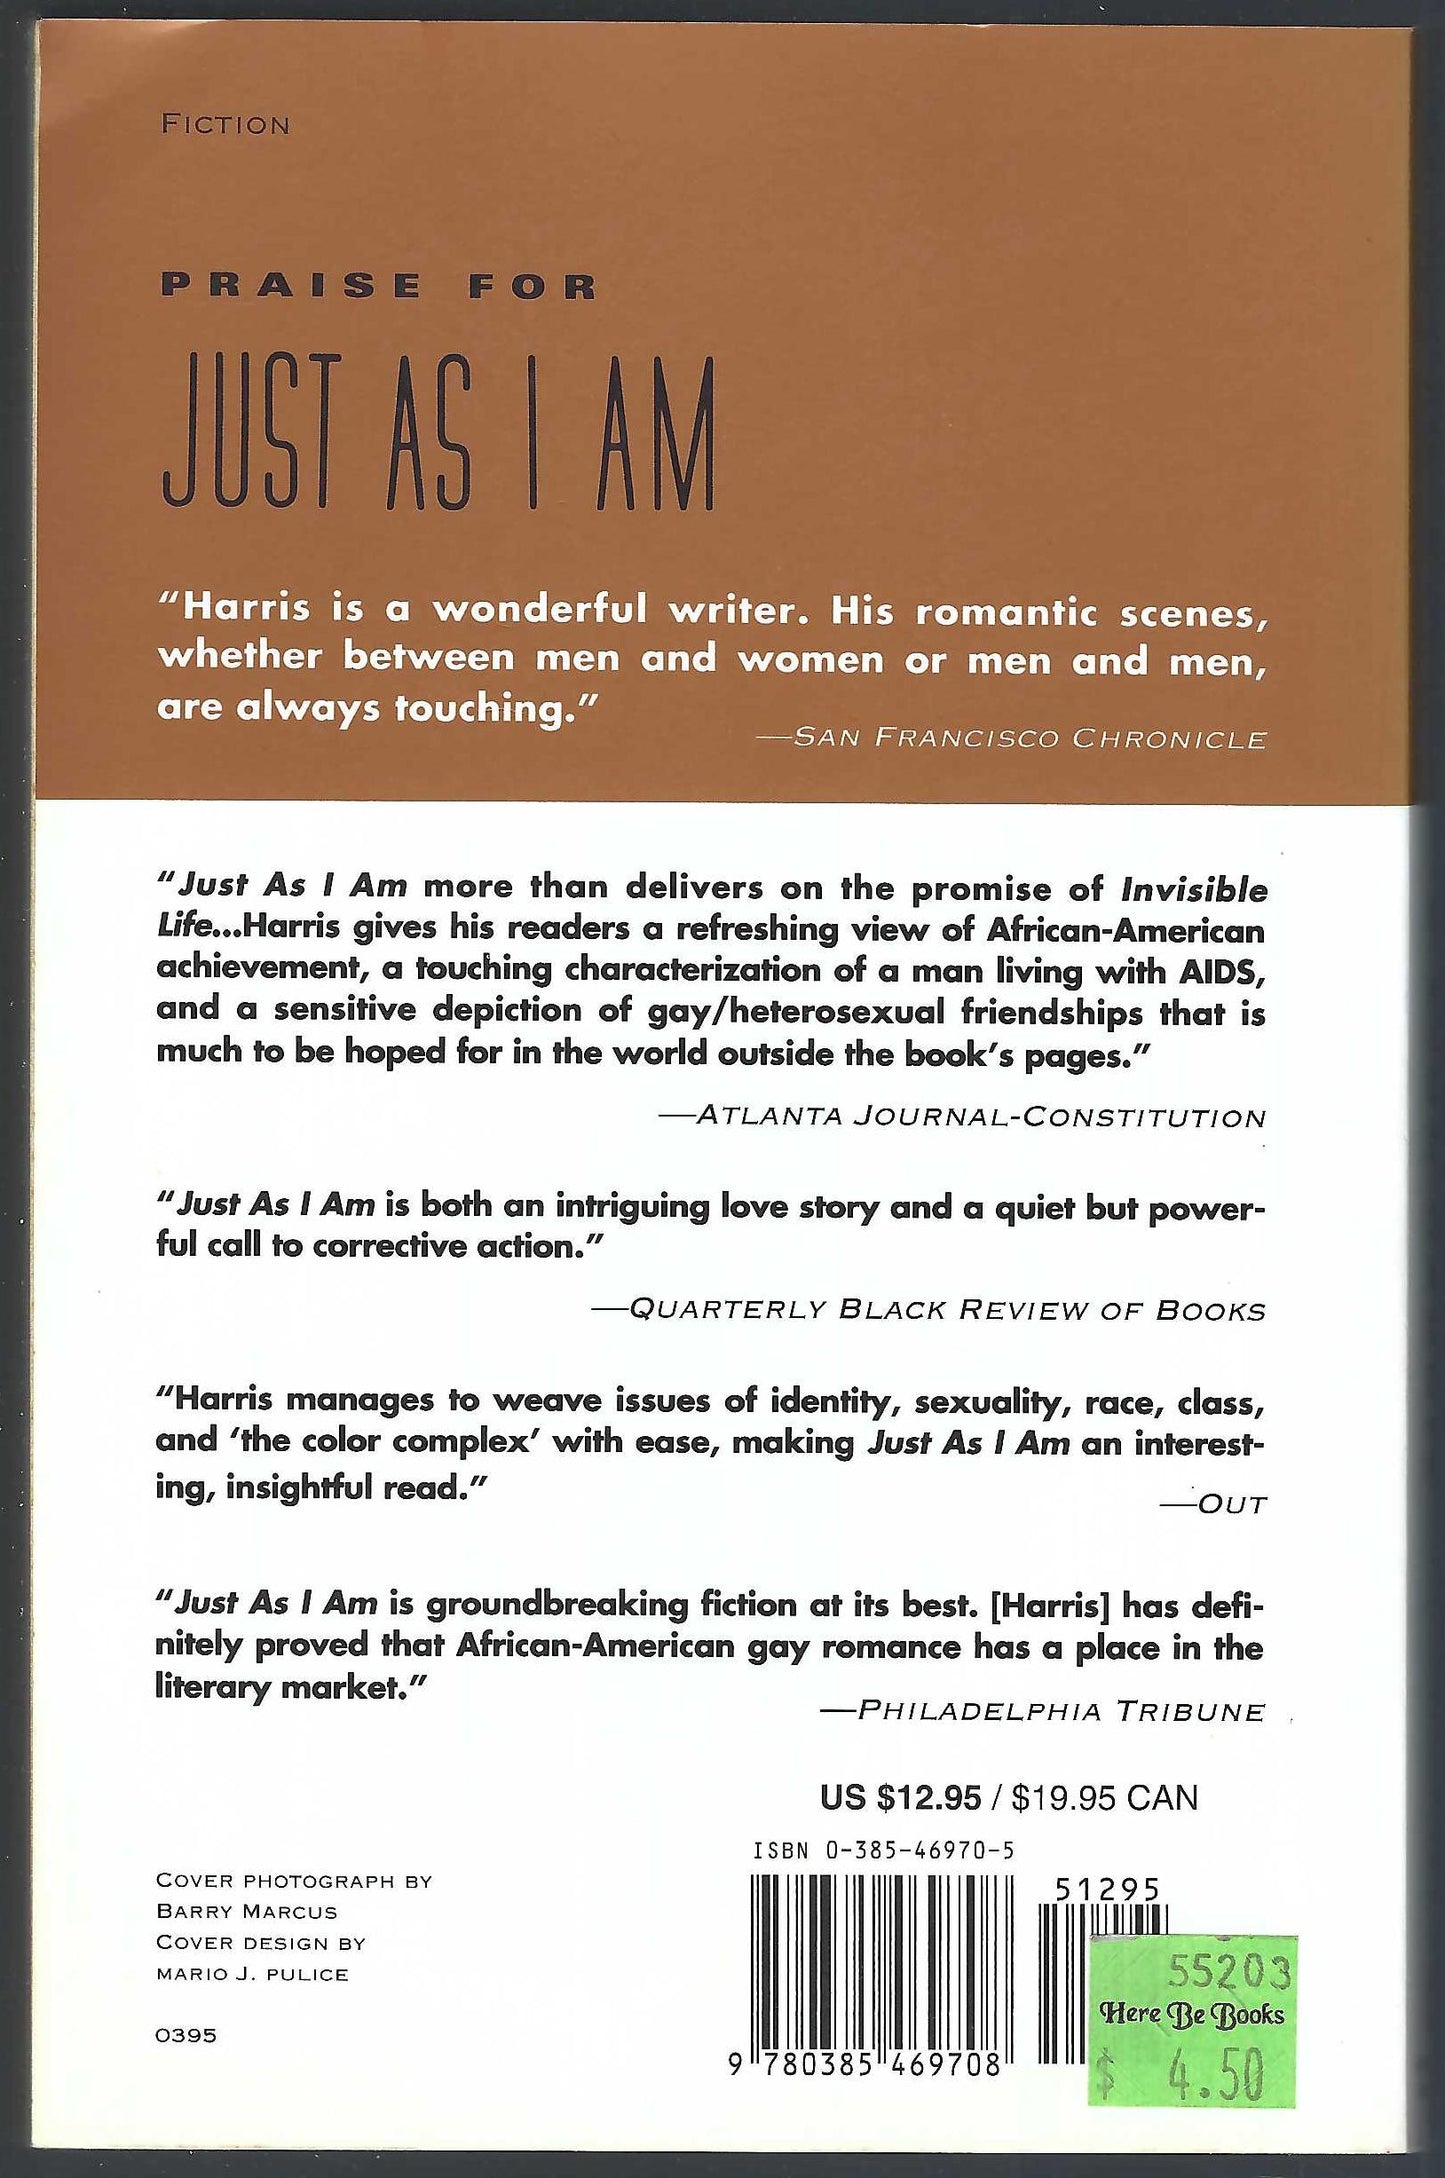 Just As I Am back cover